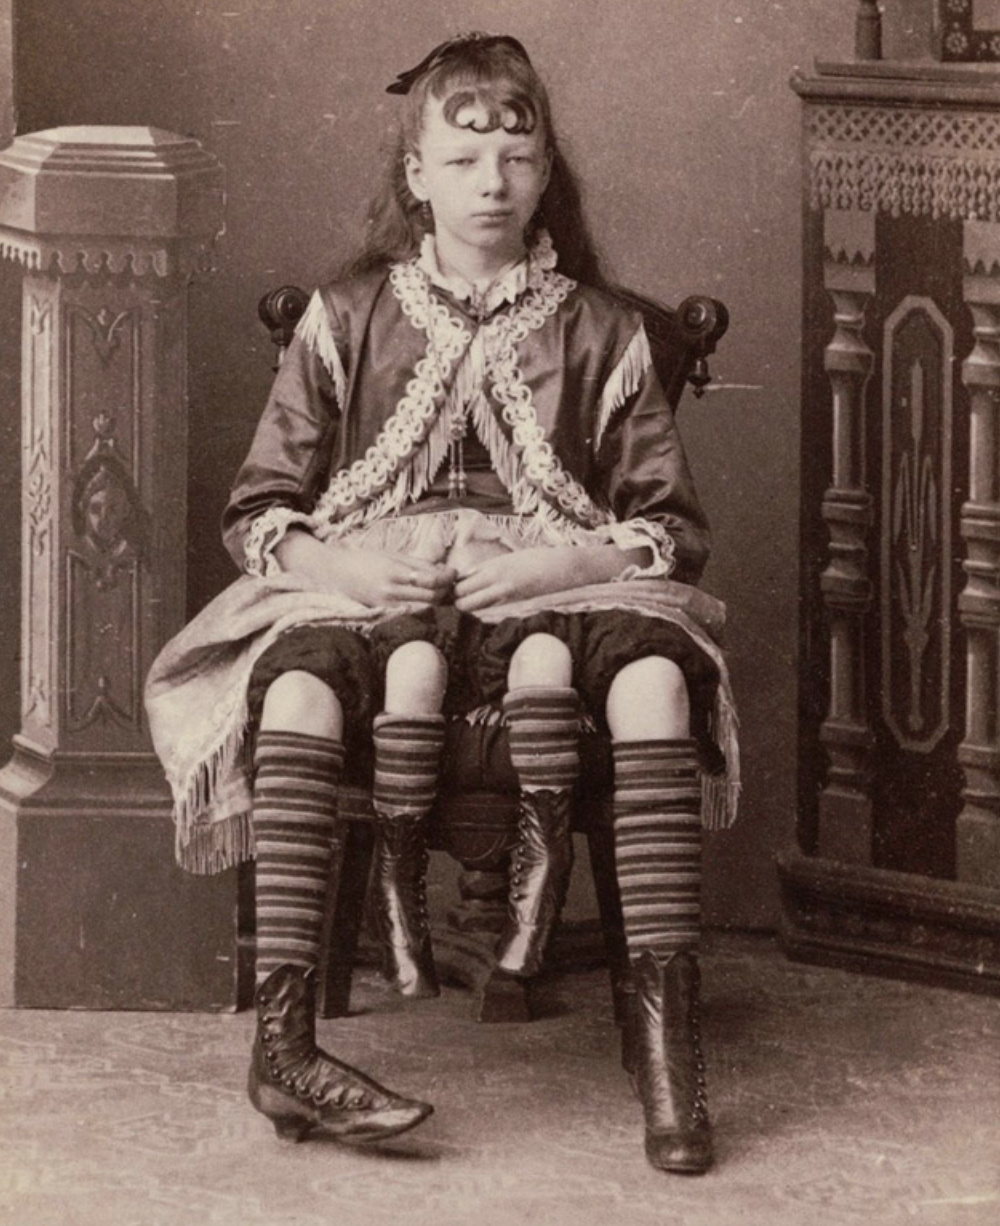 Sideshow performer Myrtle Corbin had the ability to move all four of her legs. 